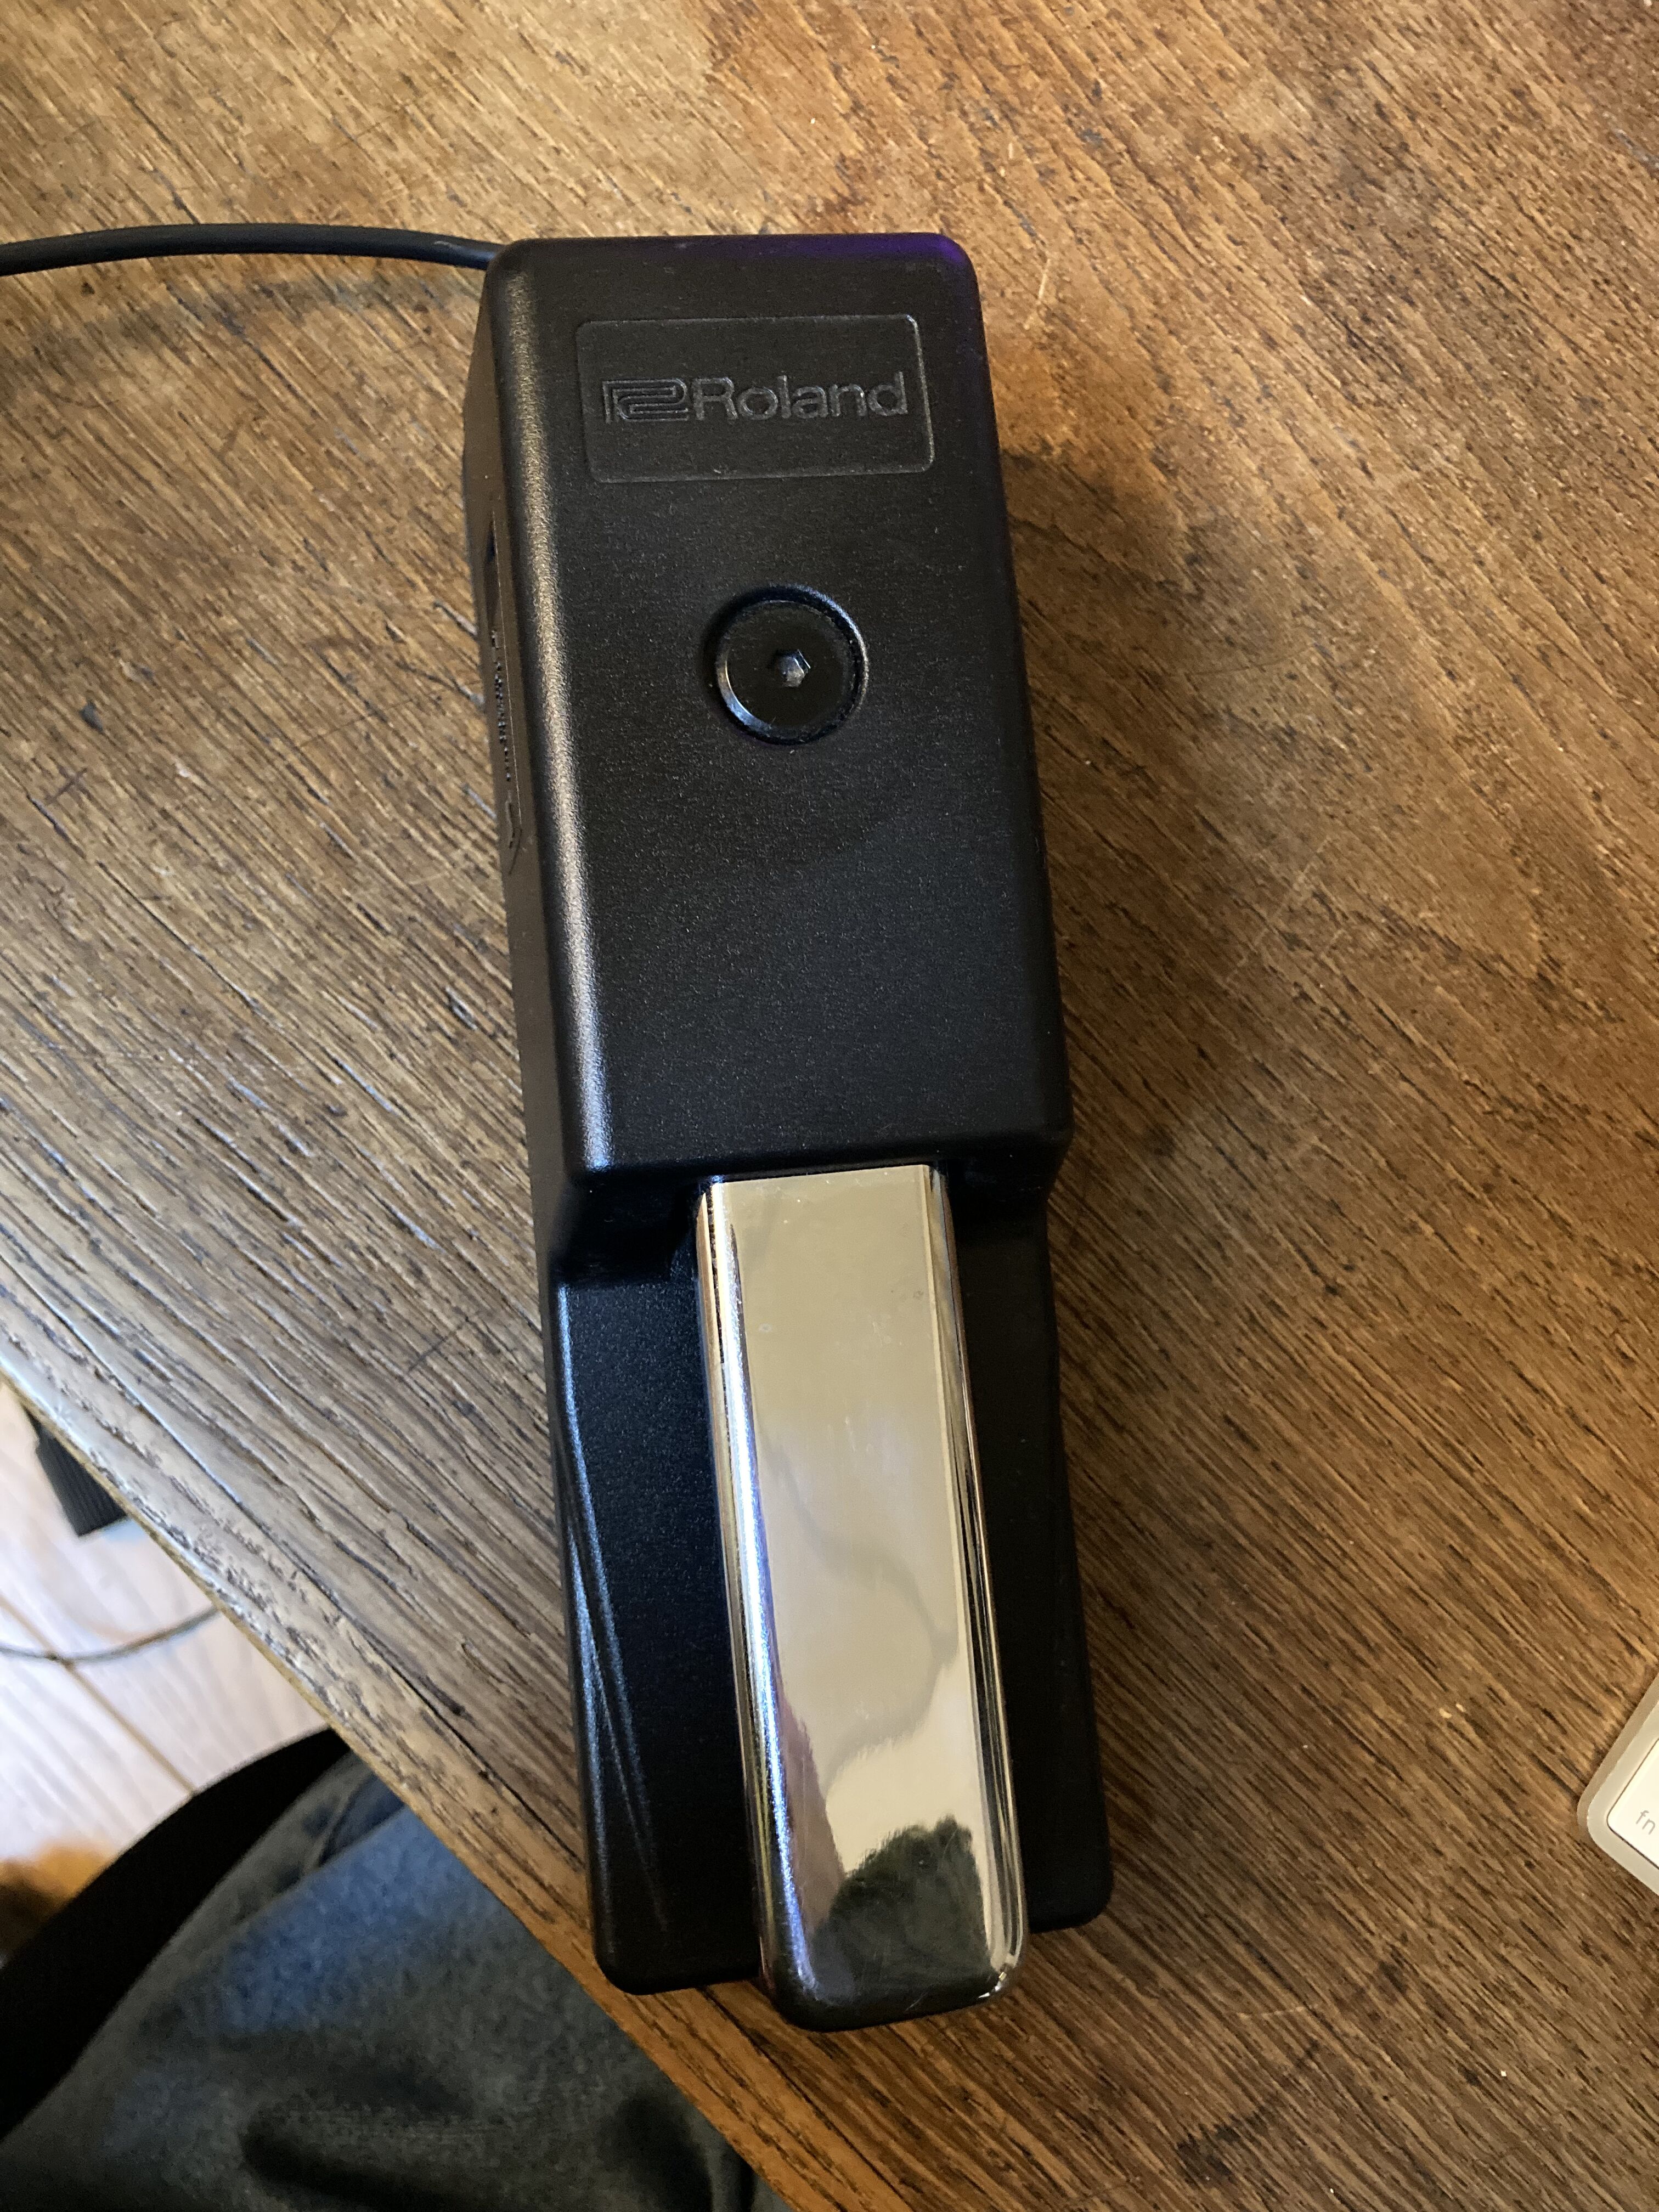 Pedal Piano Sustain Roland PEDAL DP-10